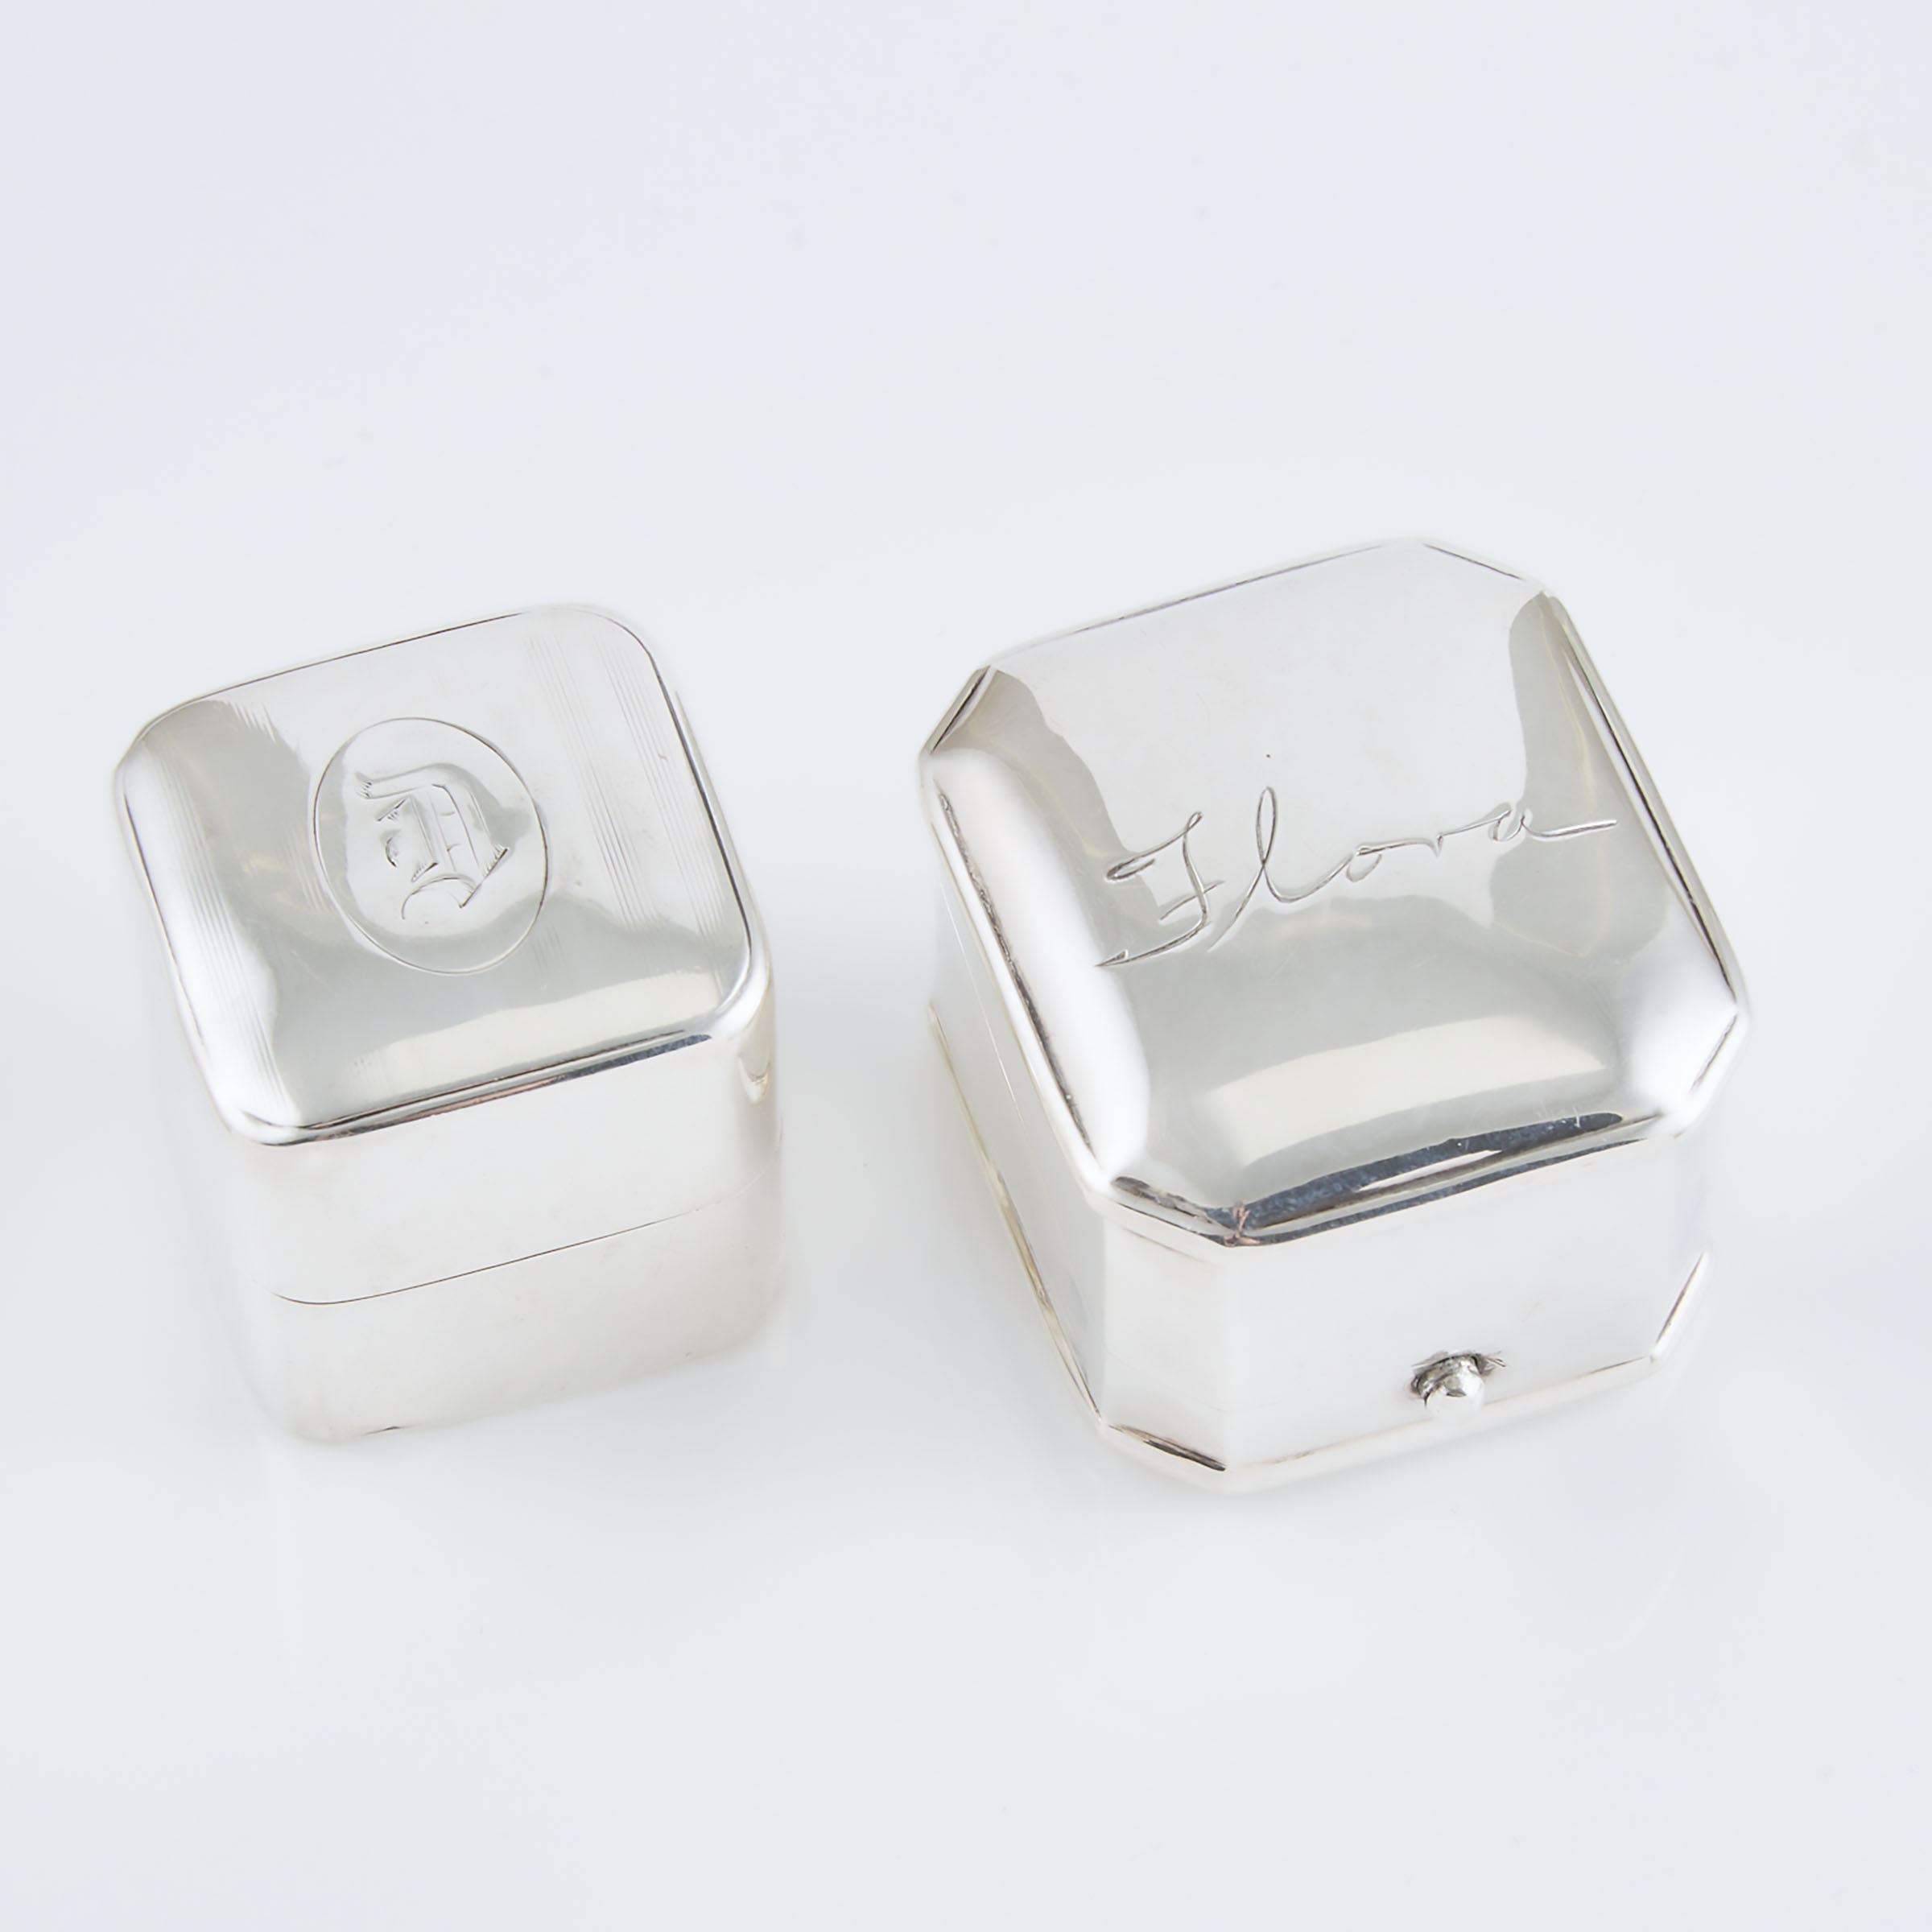 2 Sterling Silver Ring Boxes including 3ab42c